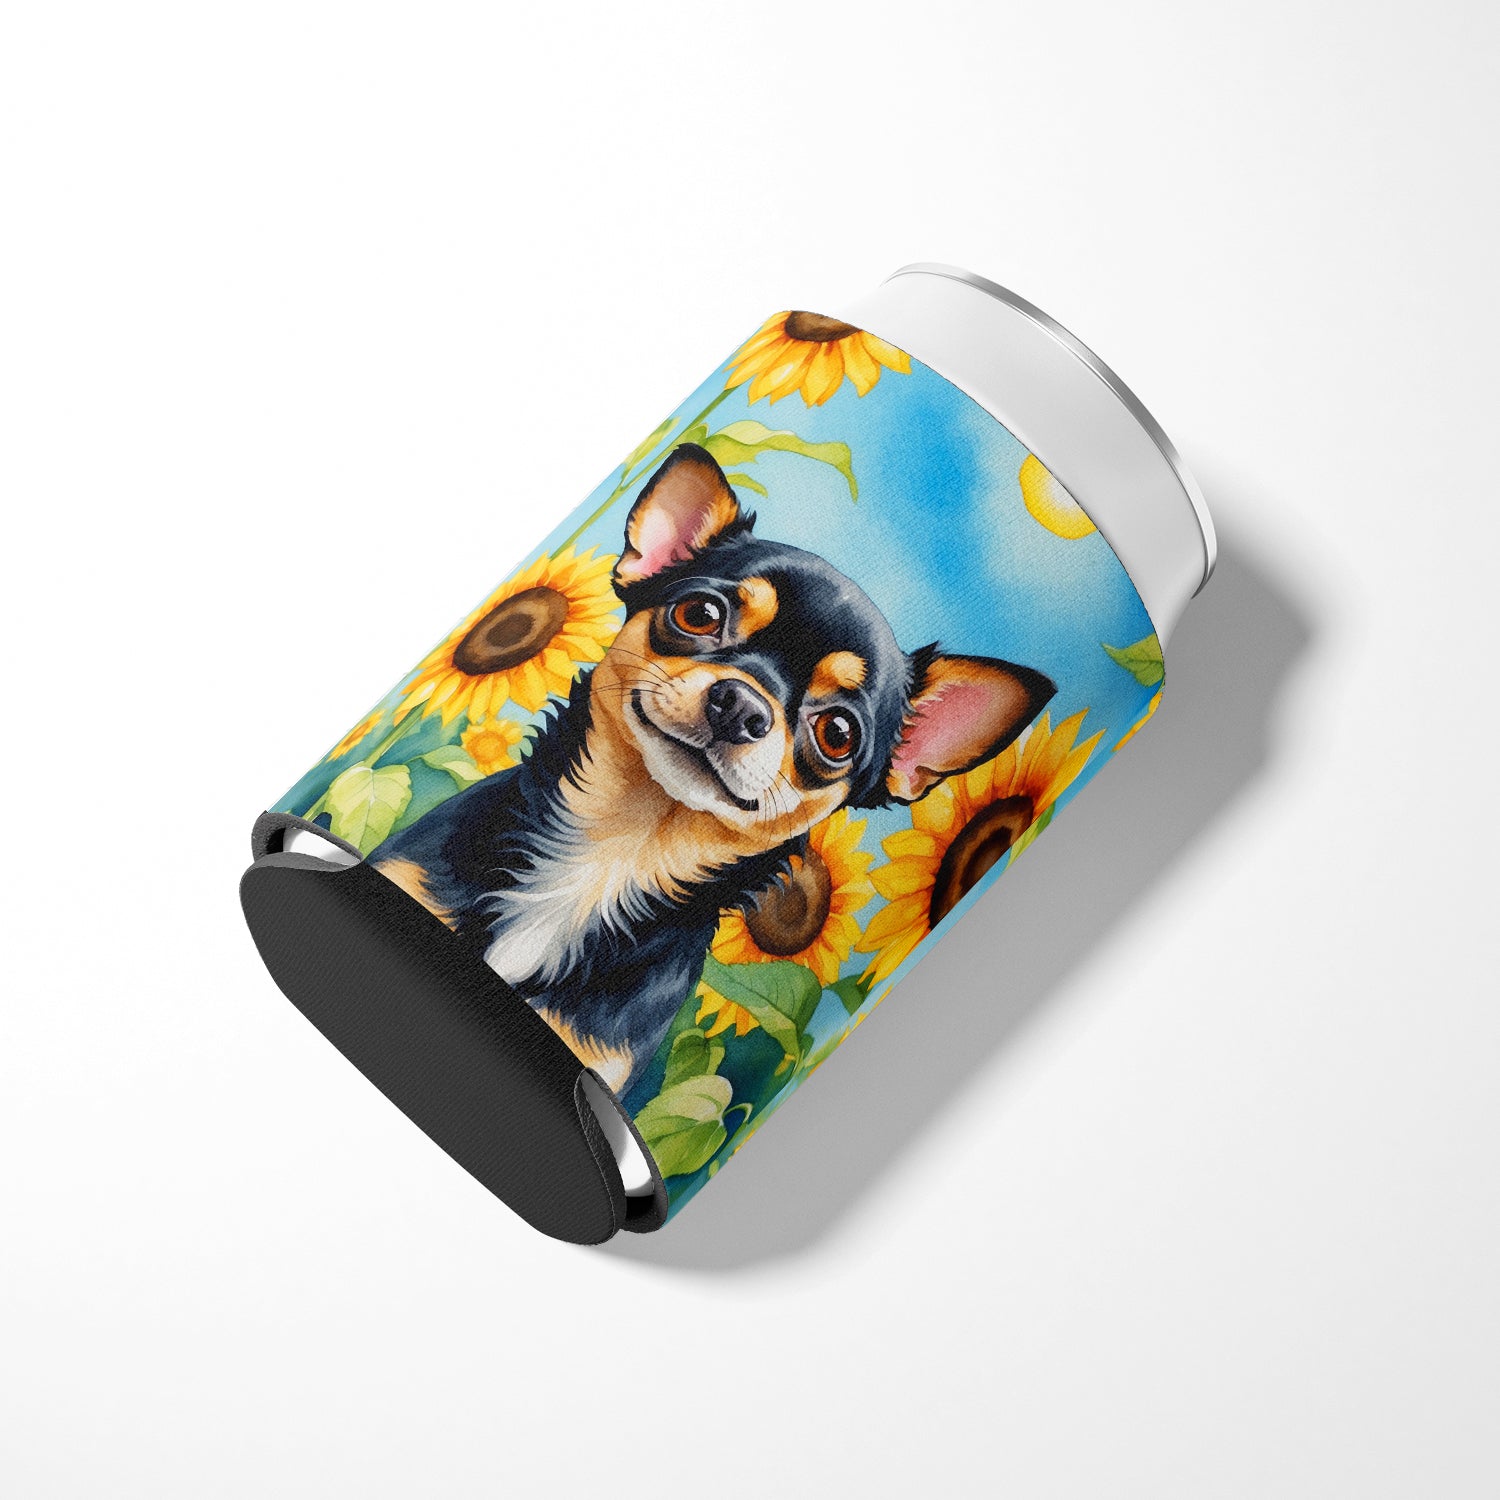 Chihuahua in Sunflowers Can or Bottle Hugger